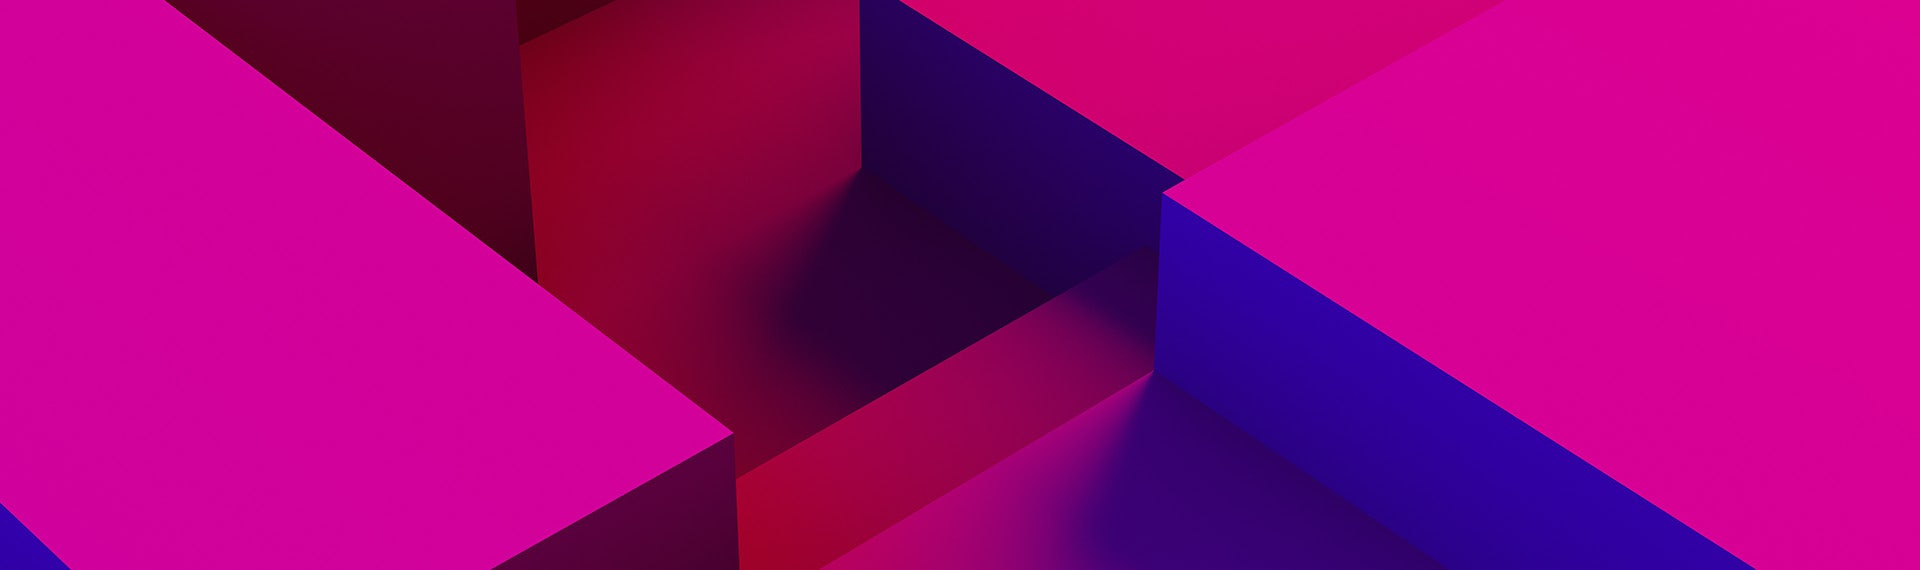 A pink, blue, and purple abstract background.